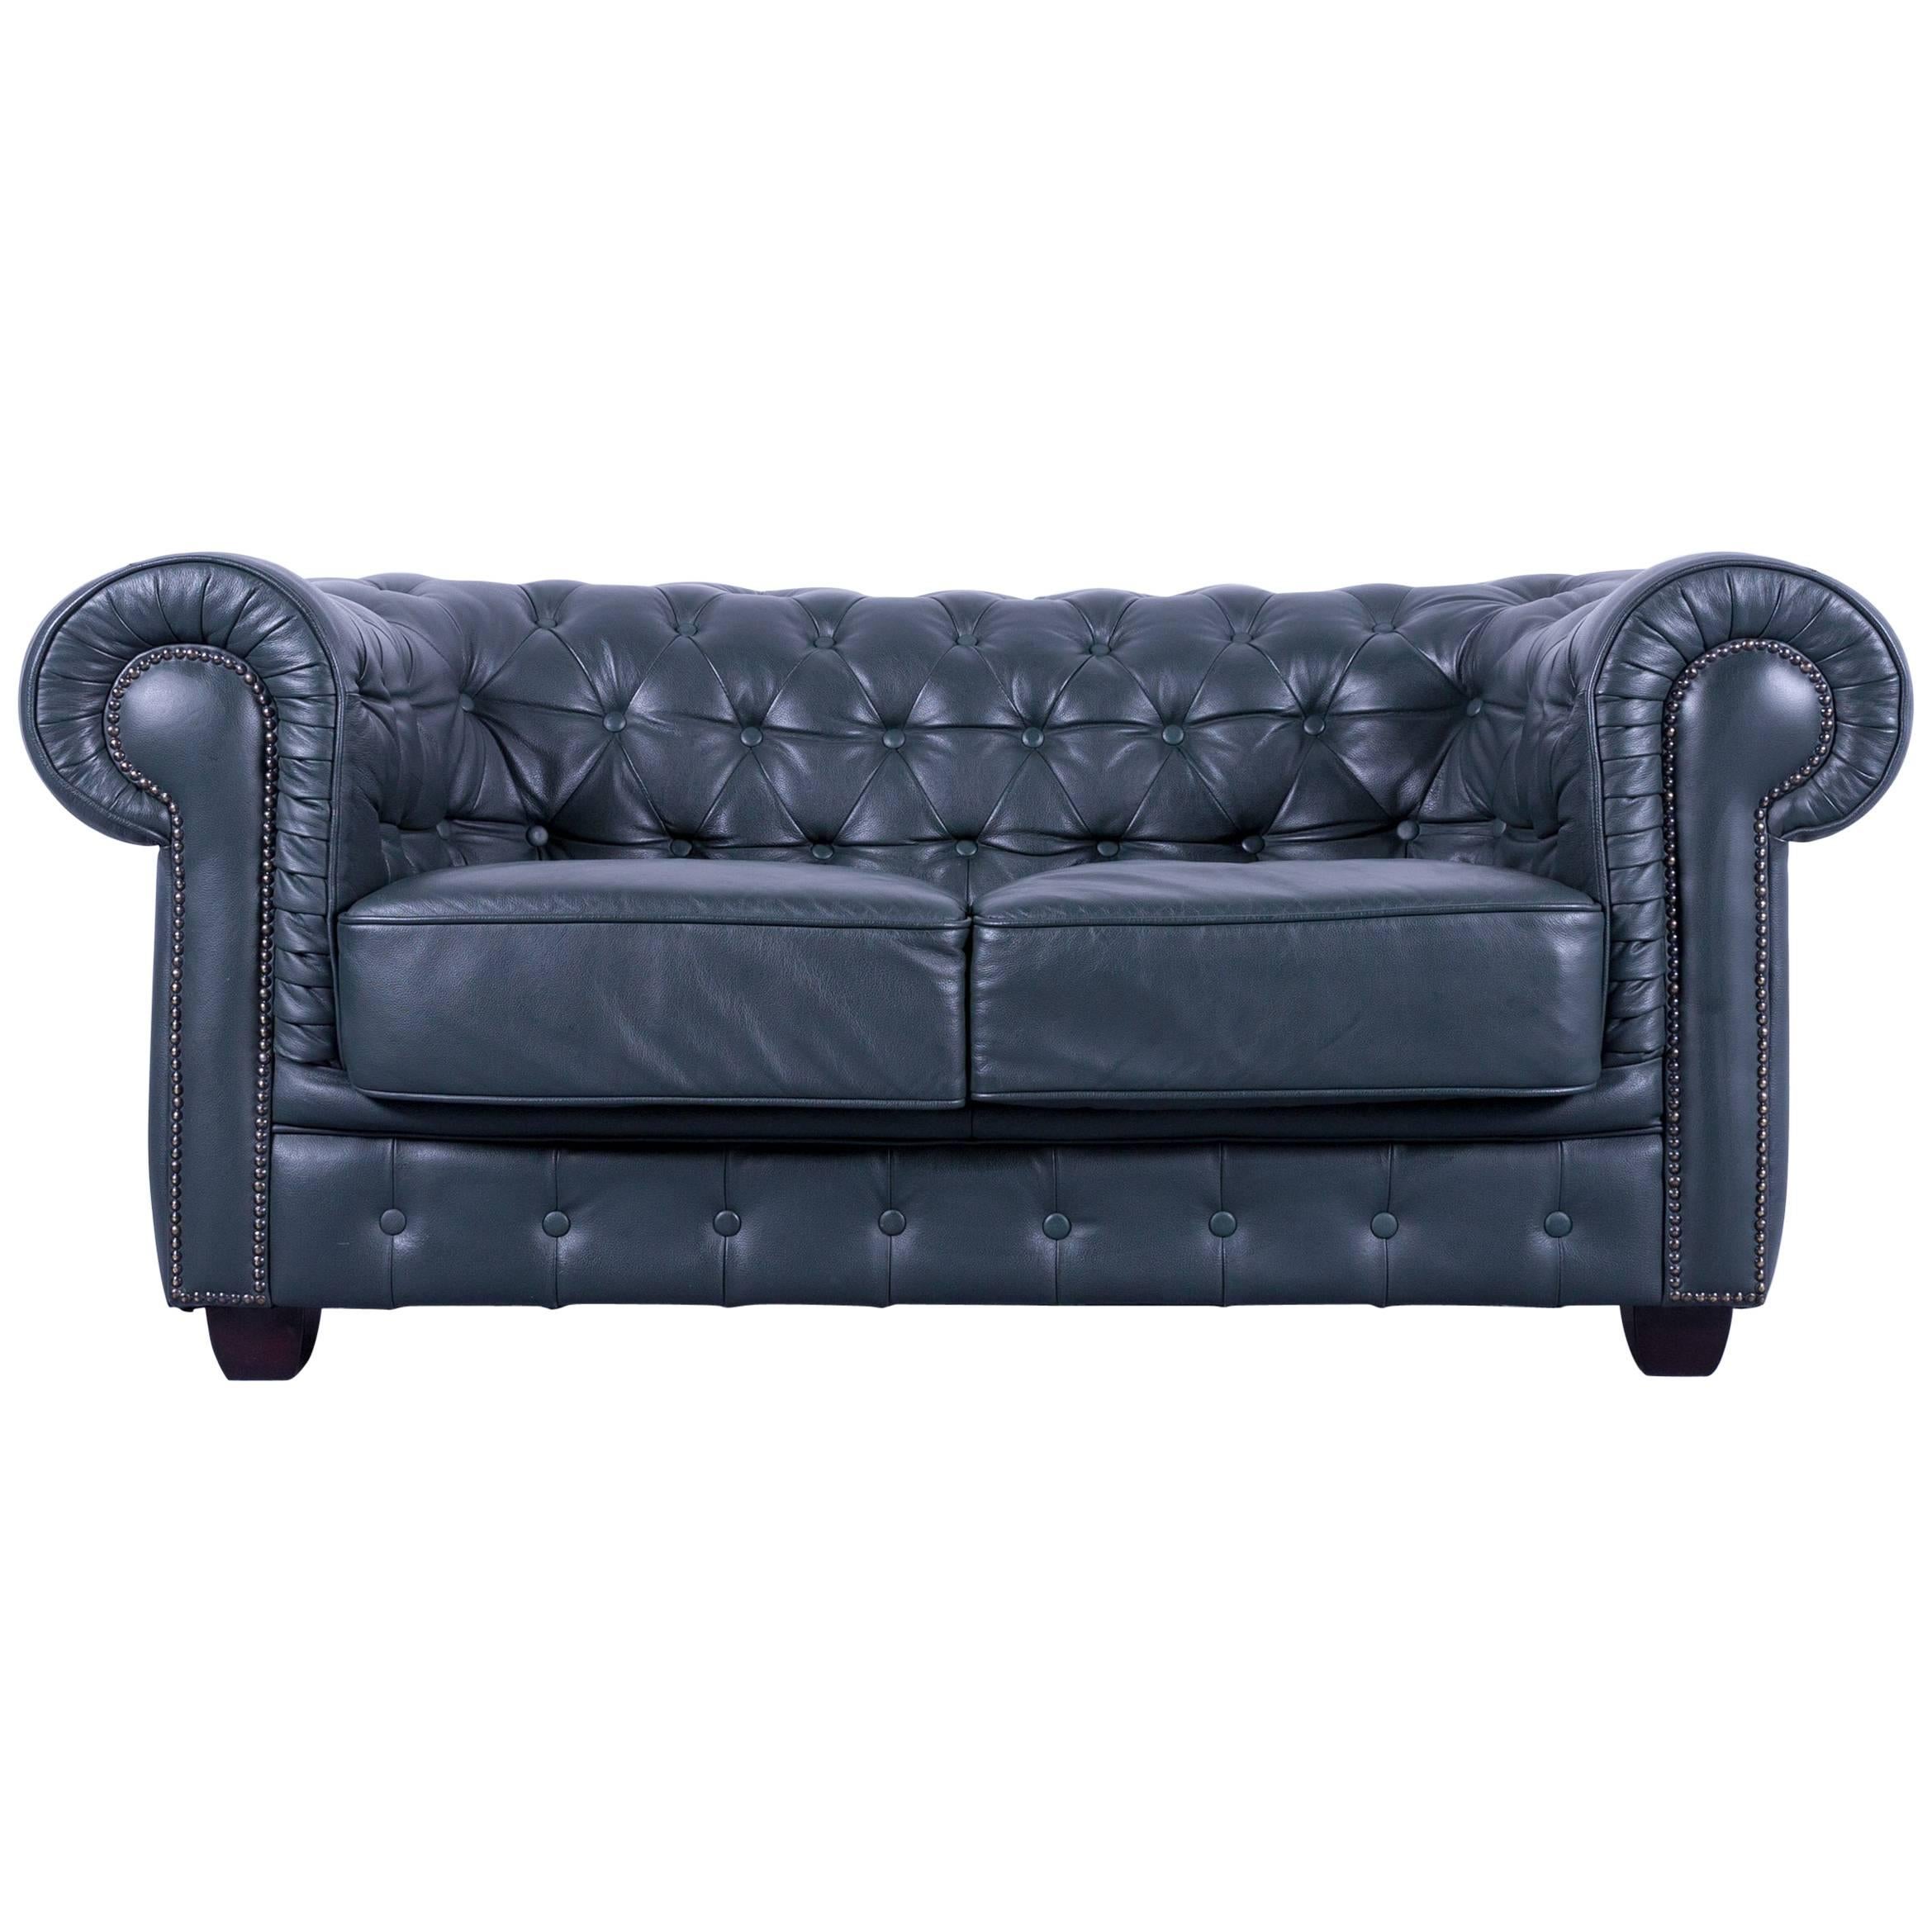 Chesterfield Sofa Dark Green Two-Seat Vintage Retro Couch Rivets UK